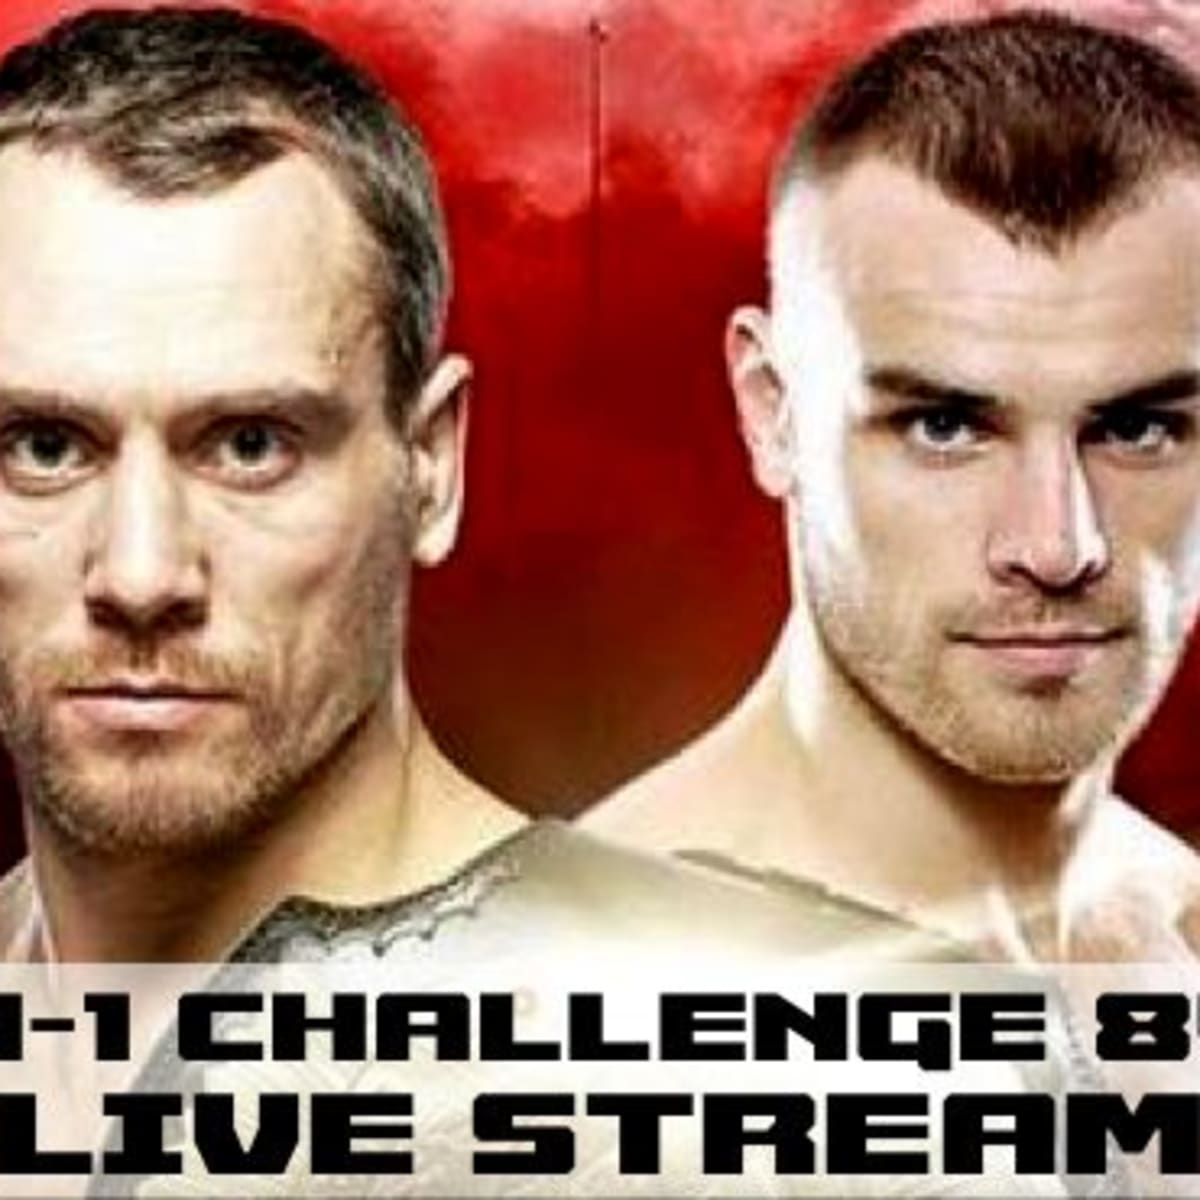 Watch M-1 Challenge 84 Kunchenko vs Romanov Live for Free (Friday at 11 am ET)